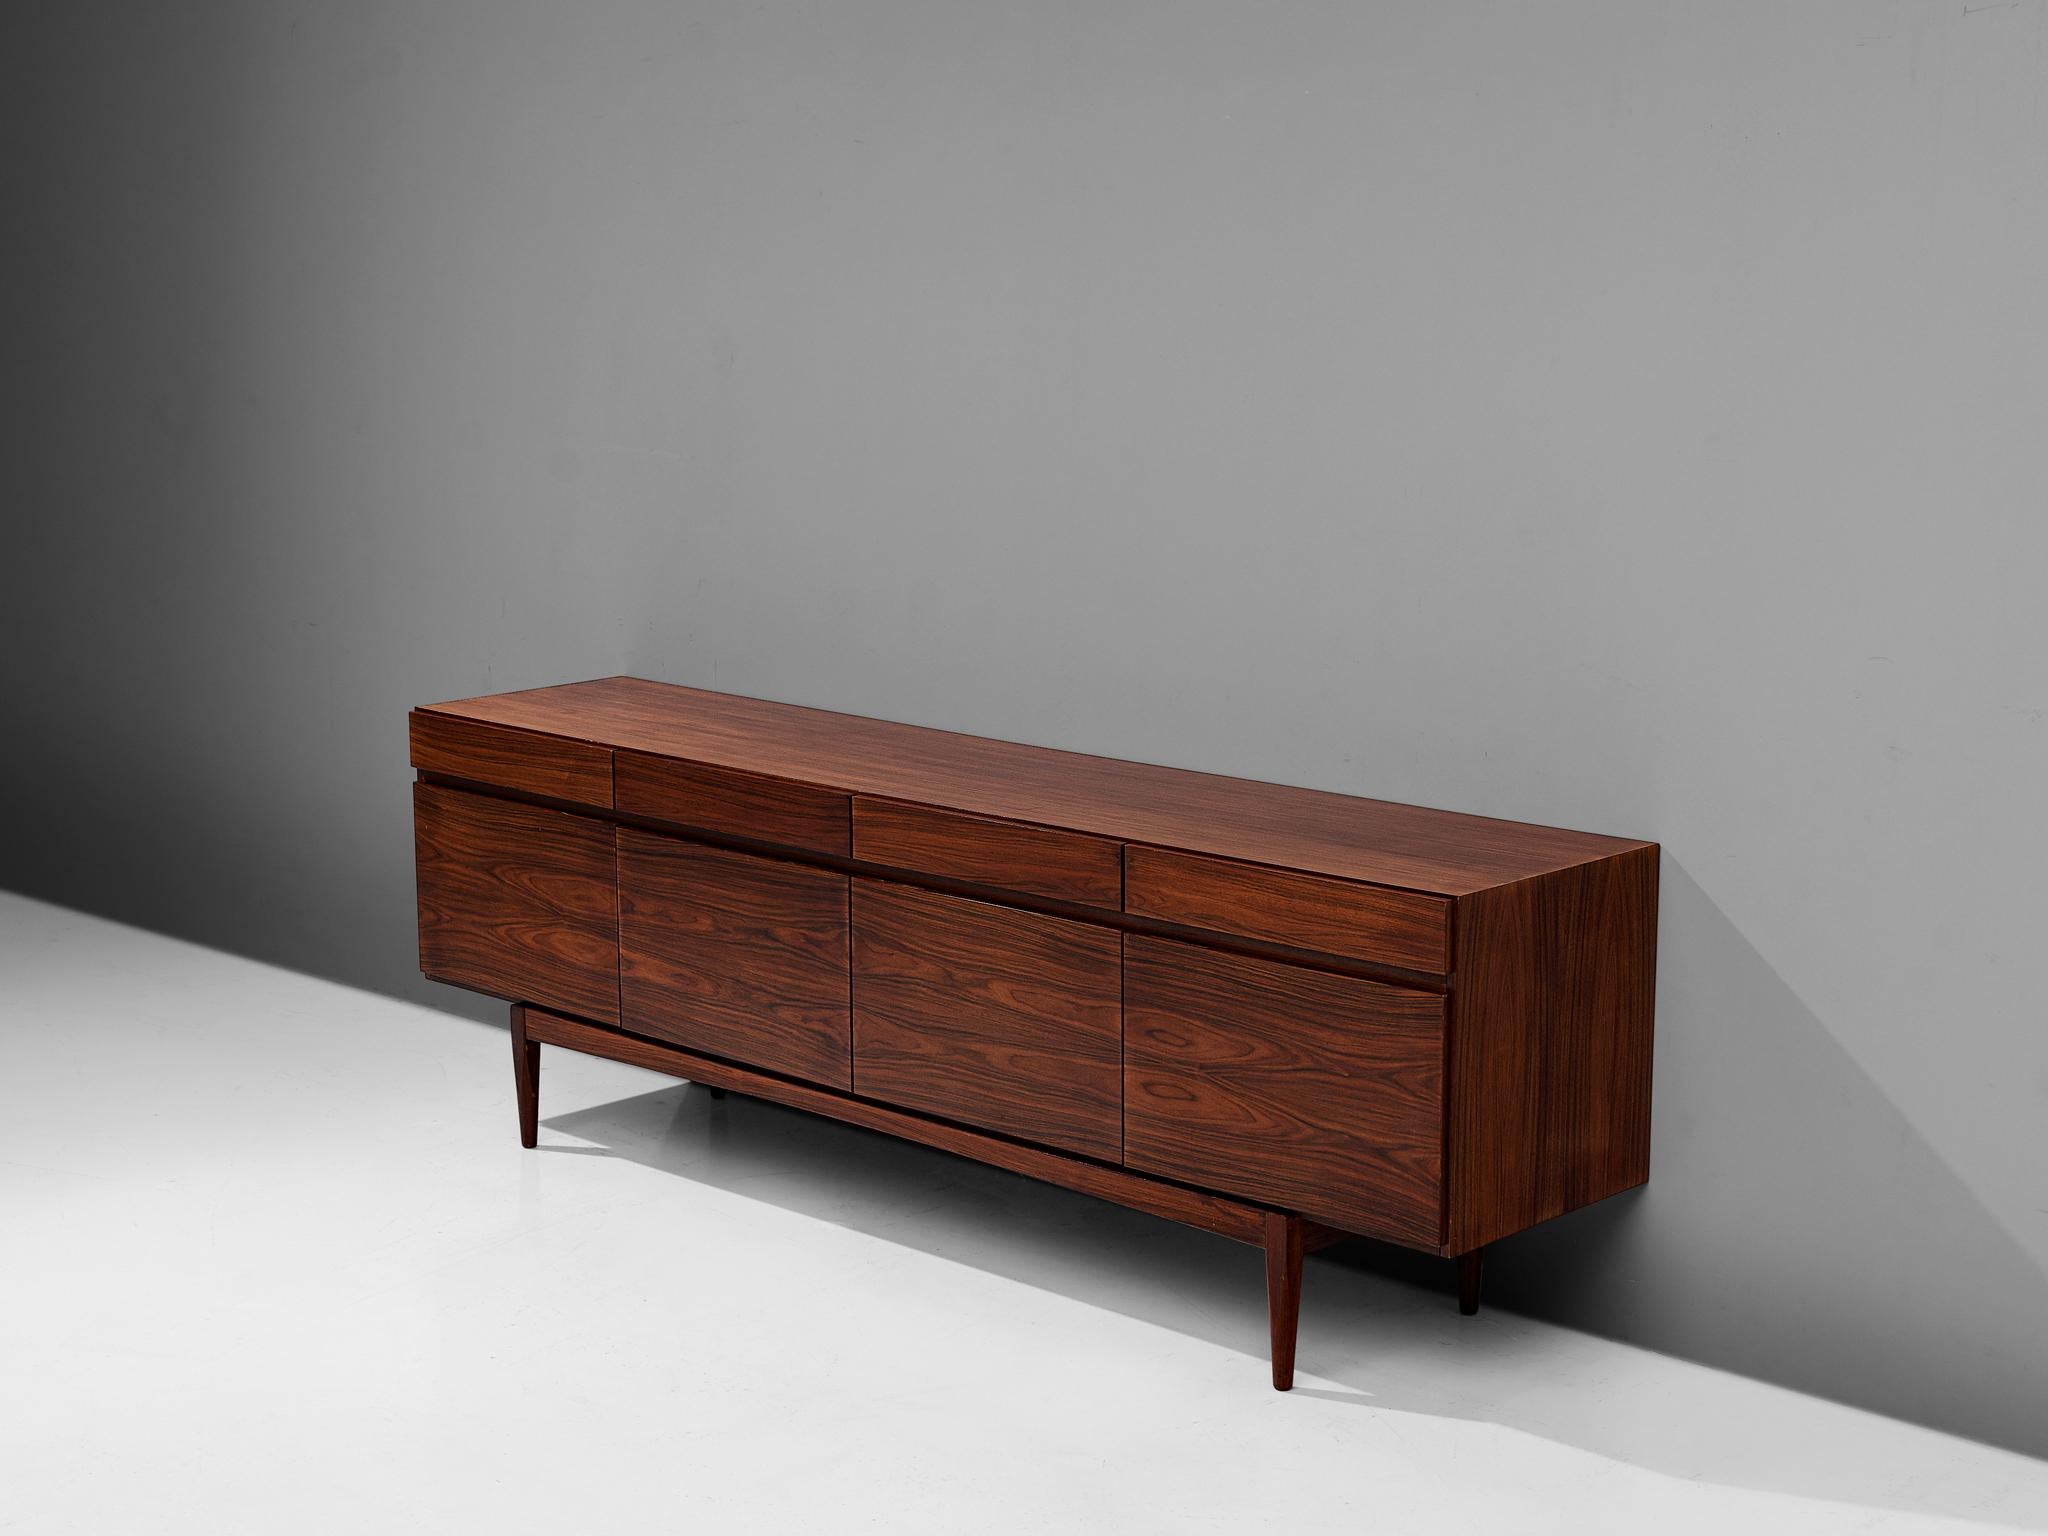 Ib Kofod-Larsen for Faarup Møbelfabrik, sideboard model FA66, rosewood, Denmark, 1960s.

Excellent designed credenza by Ib Kofod-Larsen. The sideboard contains four doors with four drawers directly above it. The inside contains three shelves and